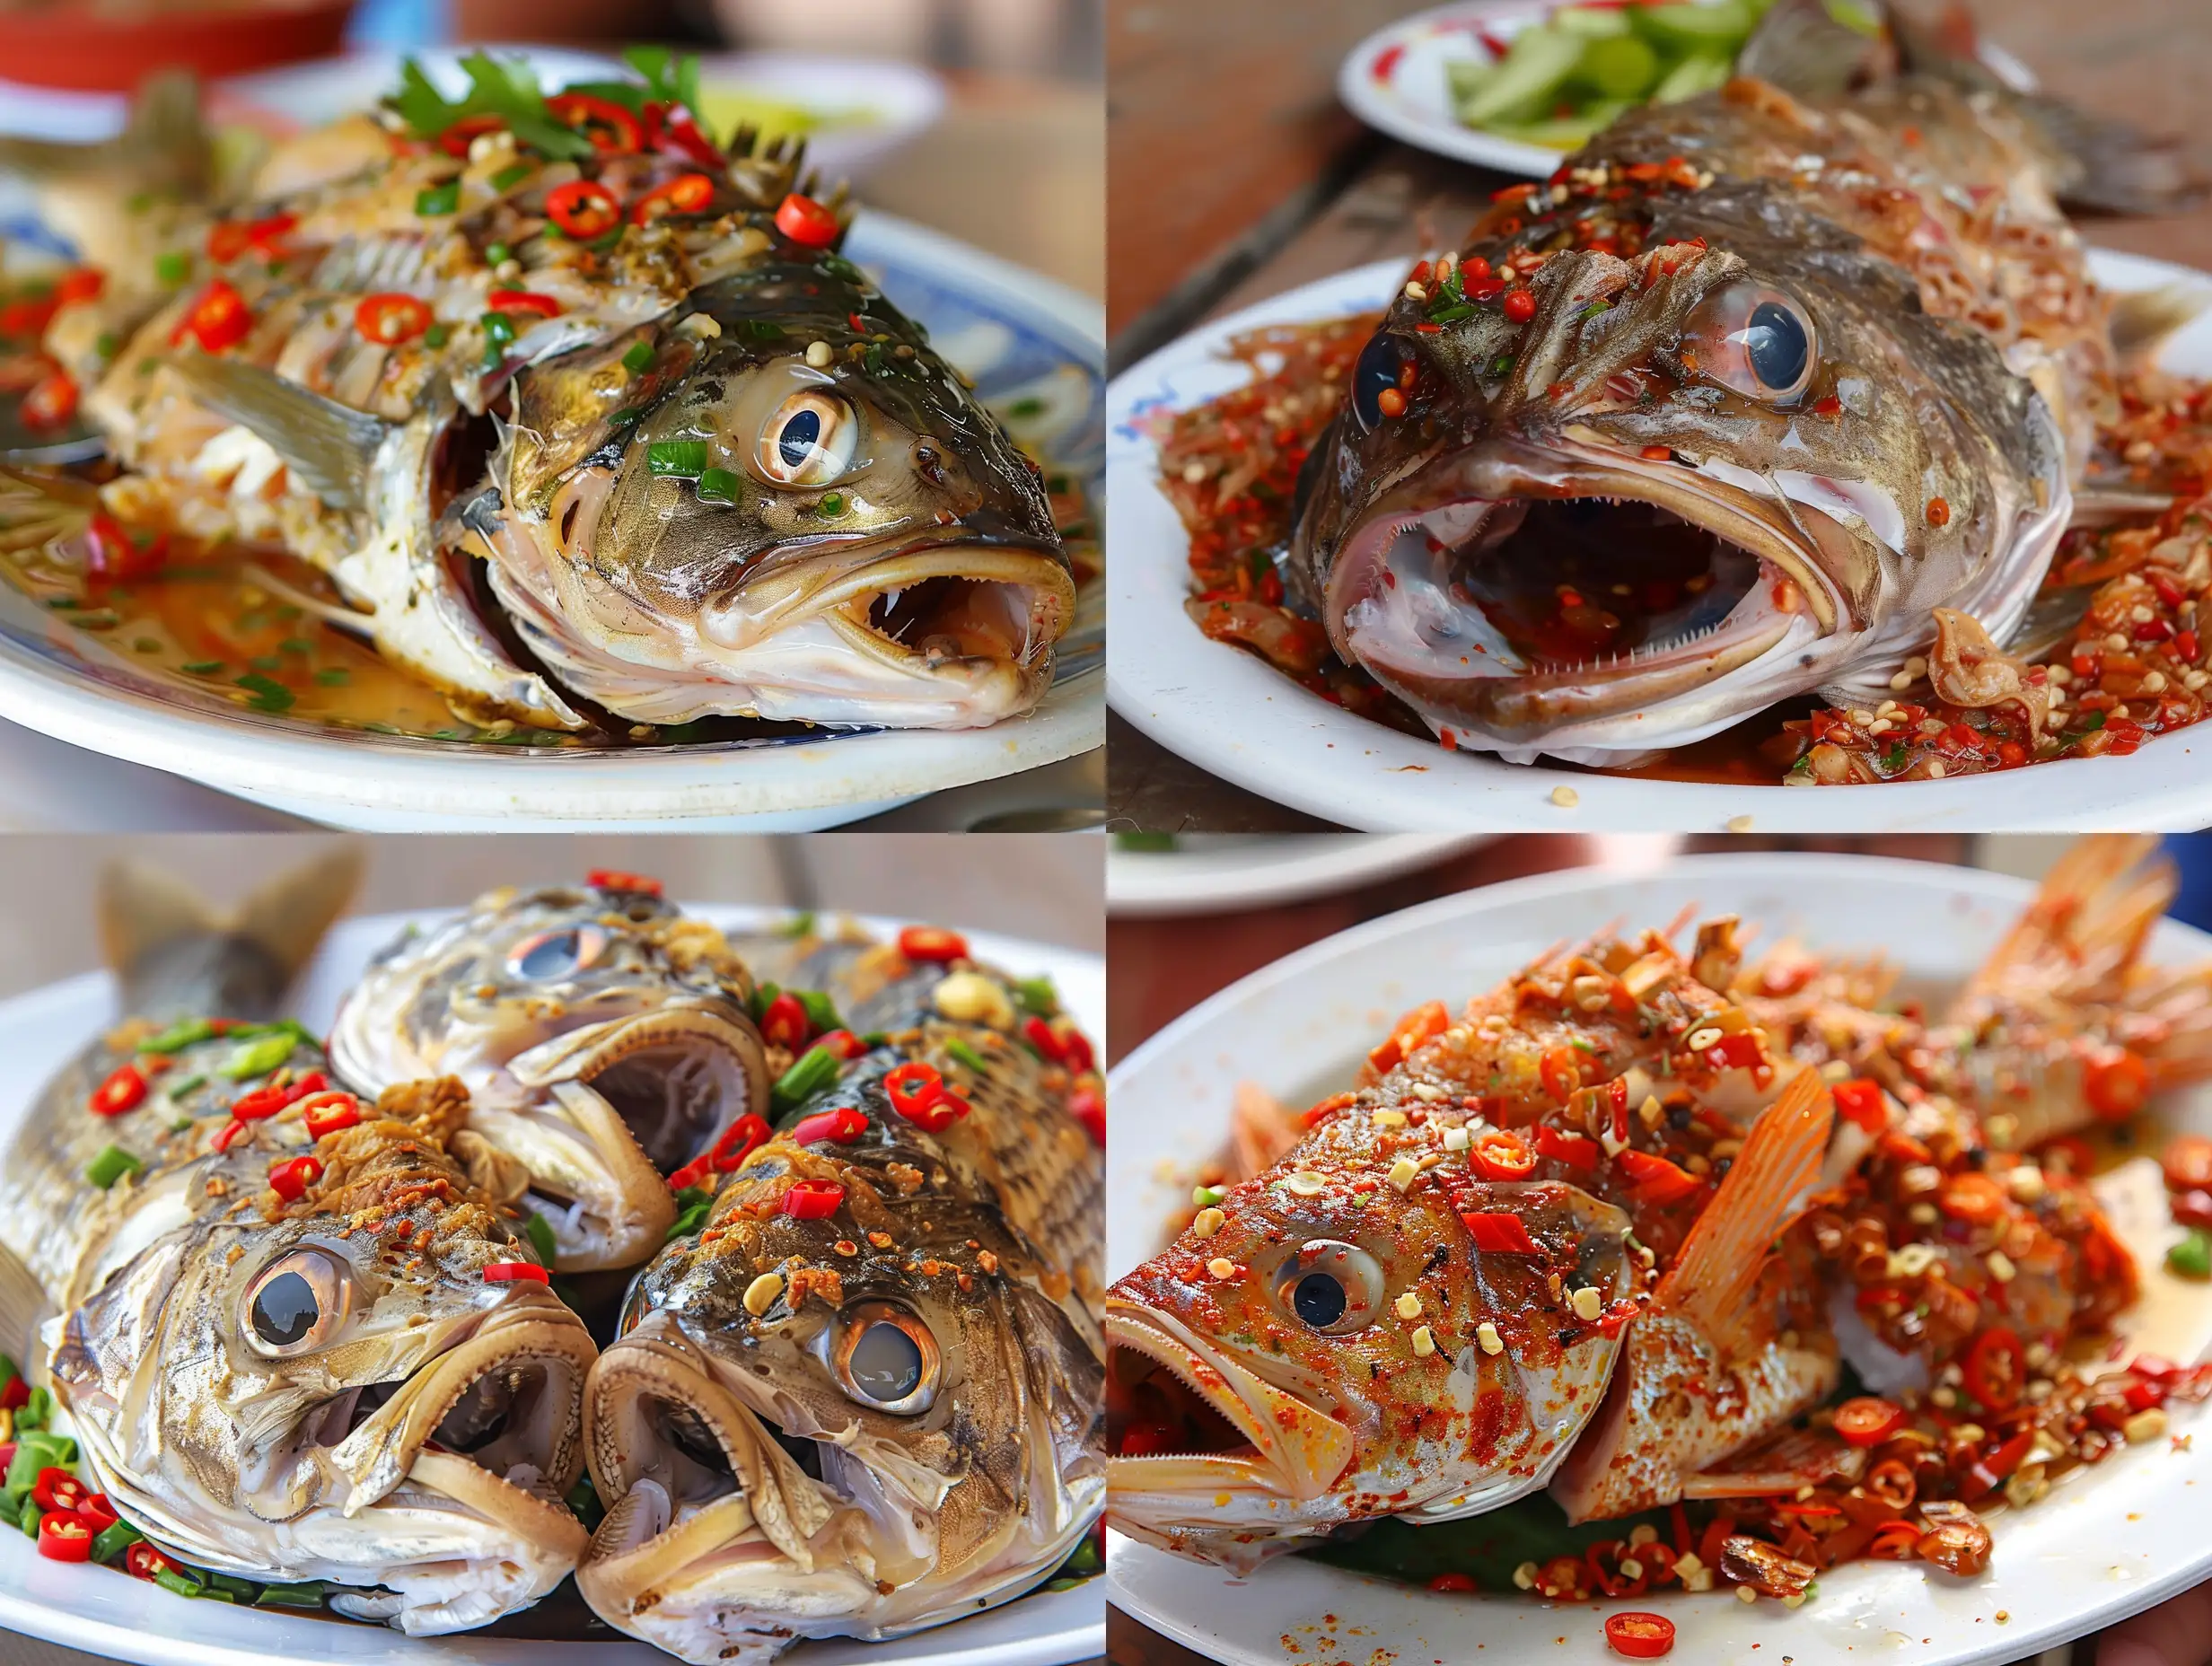 Mysterious-Smiling-Fish-Head-Plate-of-Chopped-Pepper-Fish